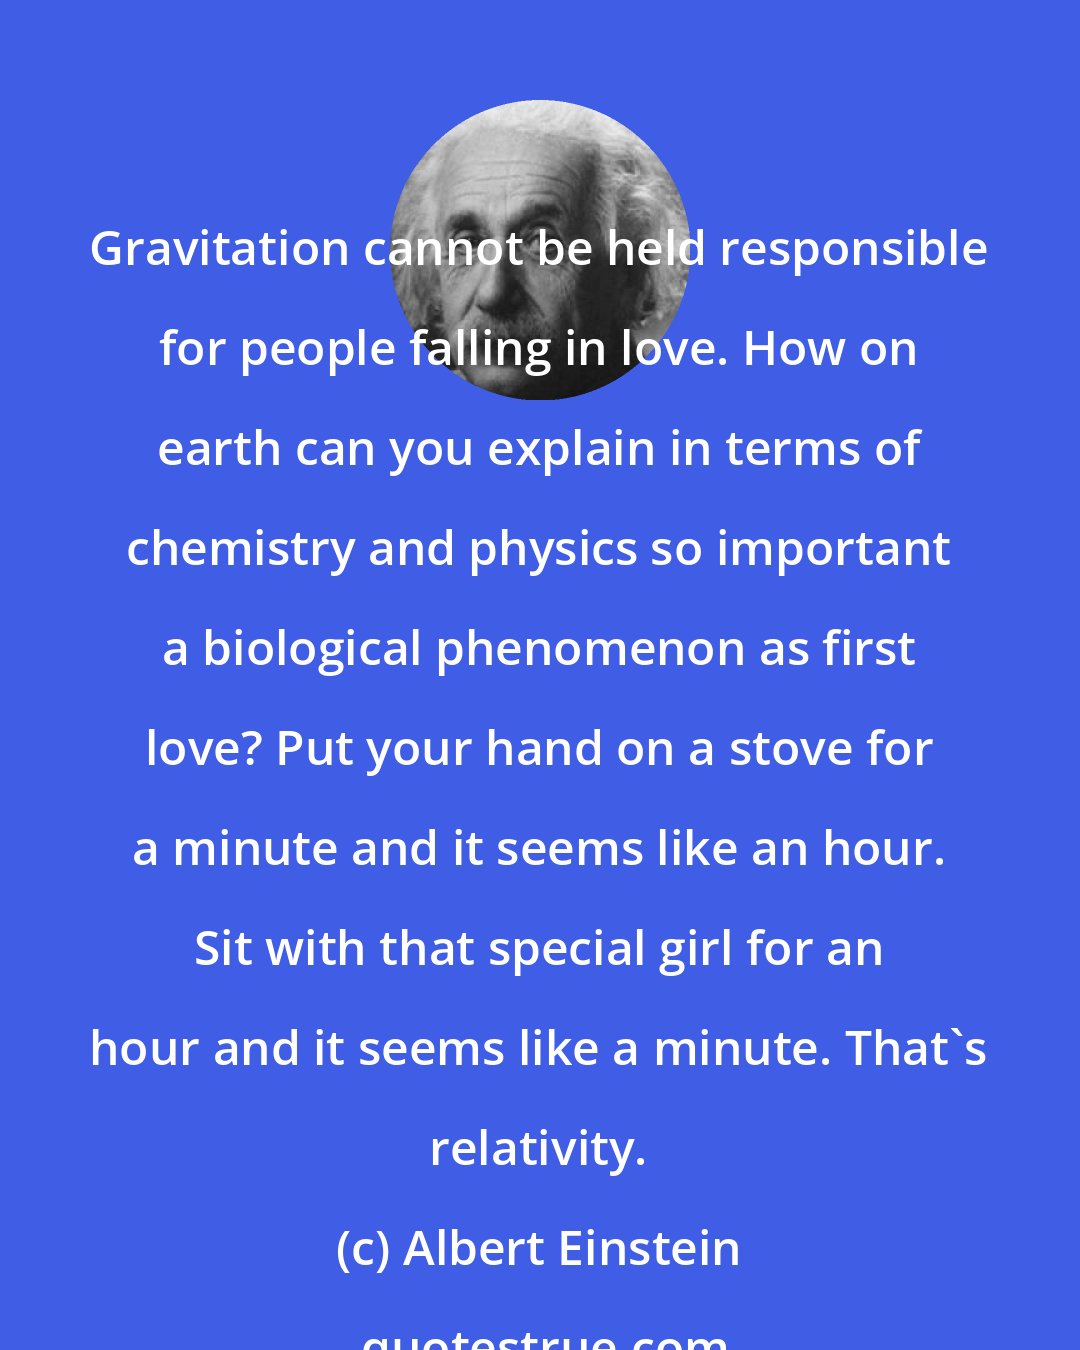 Albert Einstein: Gravitation cannot be held responsible for people falling in love. How on earth can you explain in terms of chemistry and physics so important a biological phenomenon as first love? Put your hand on a stove for a minute and it seems like an hour. Sit with that special girl for an hour and it seems like a minute. That's relativity.